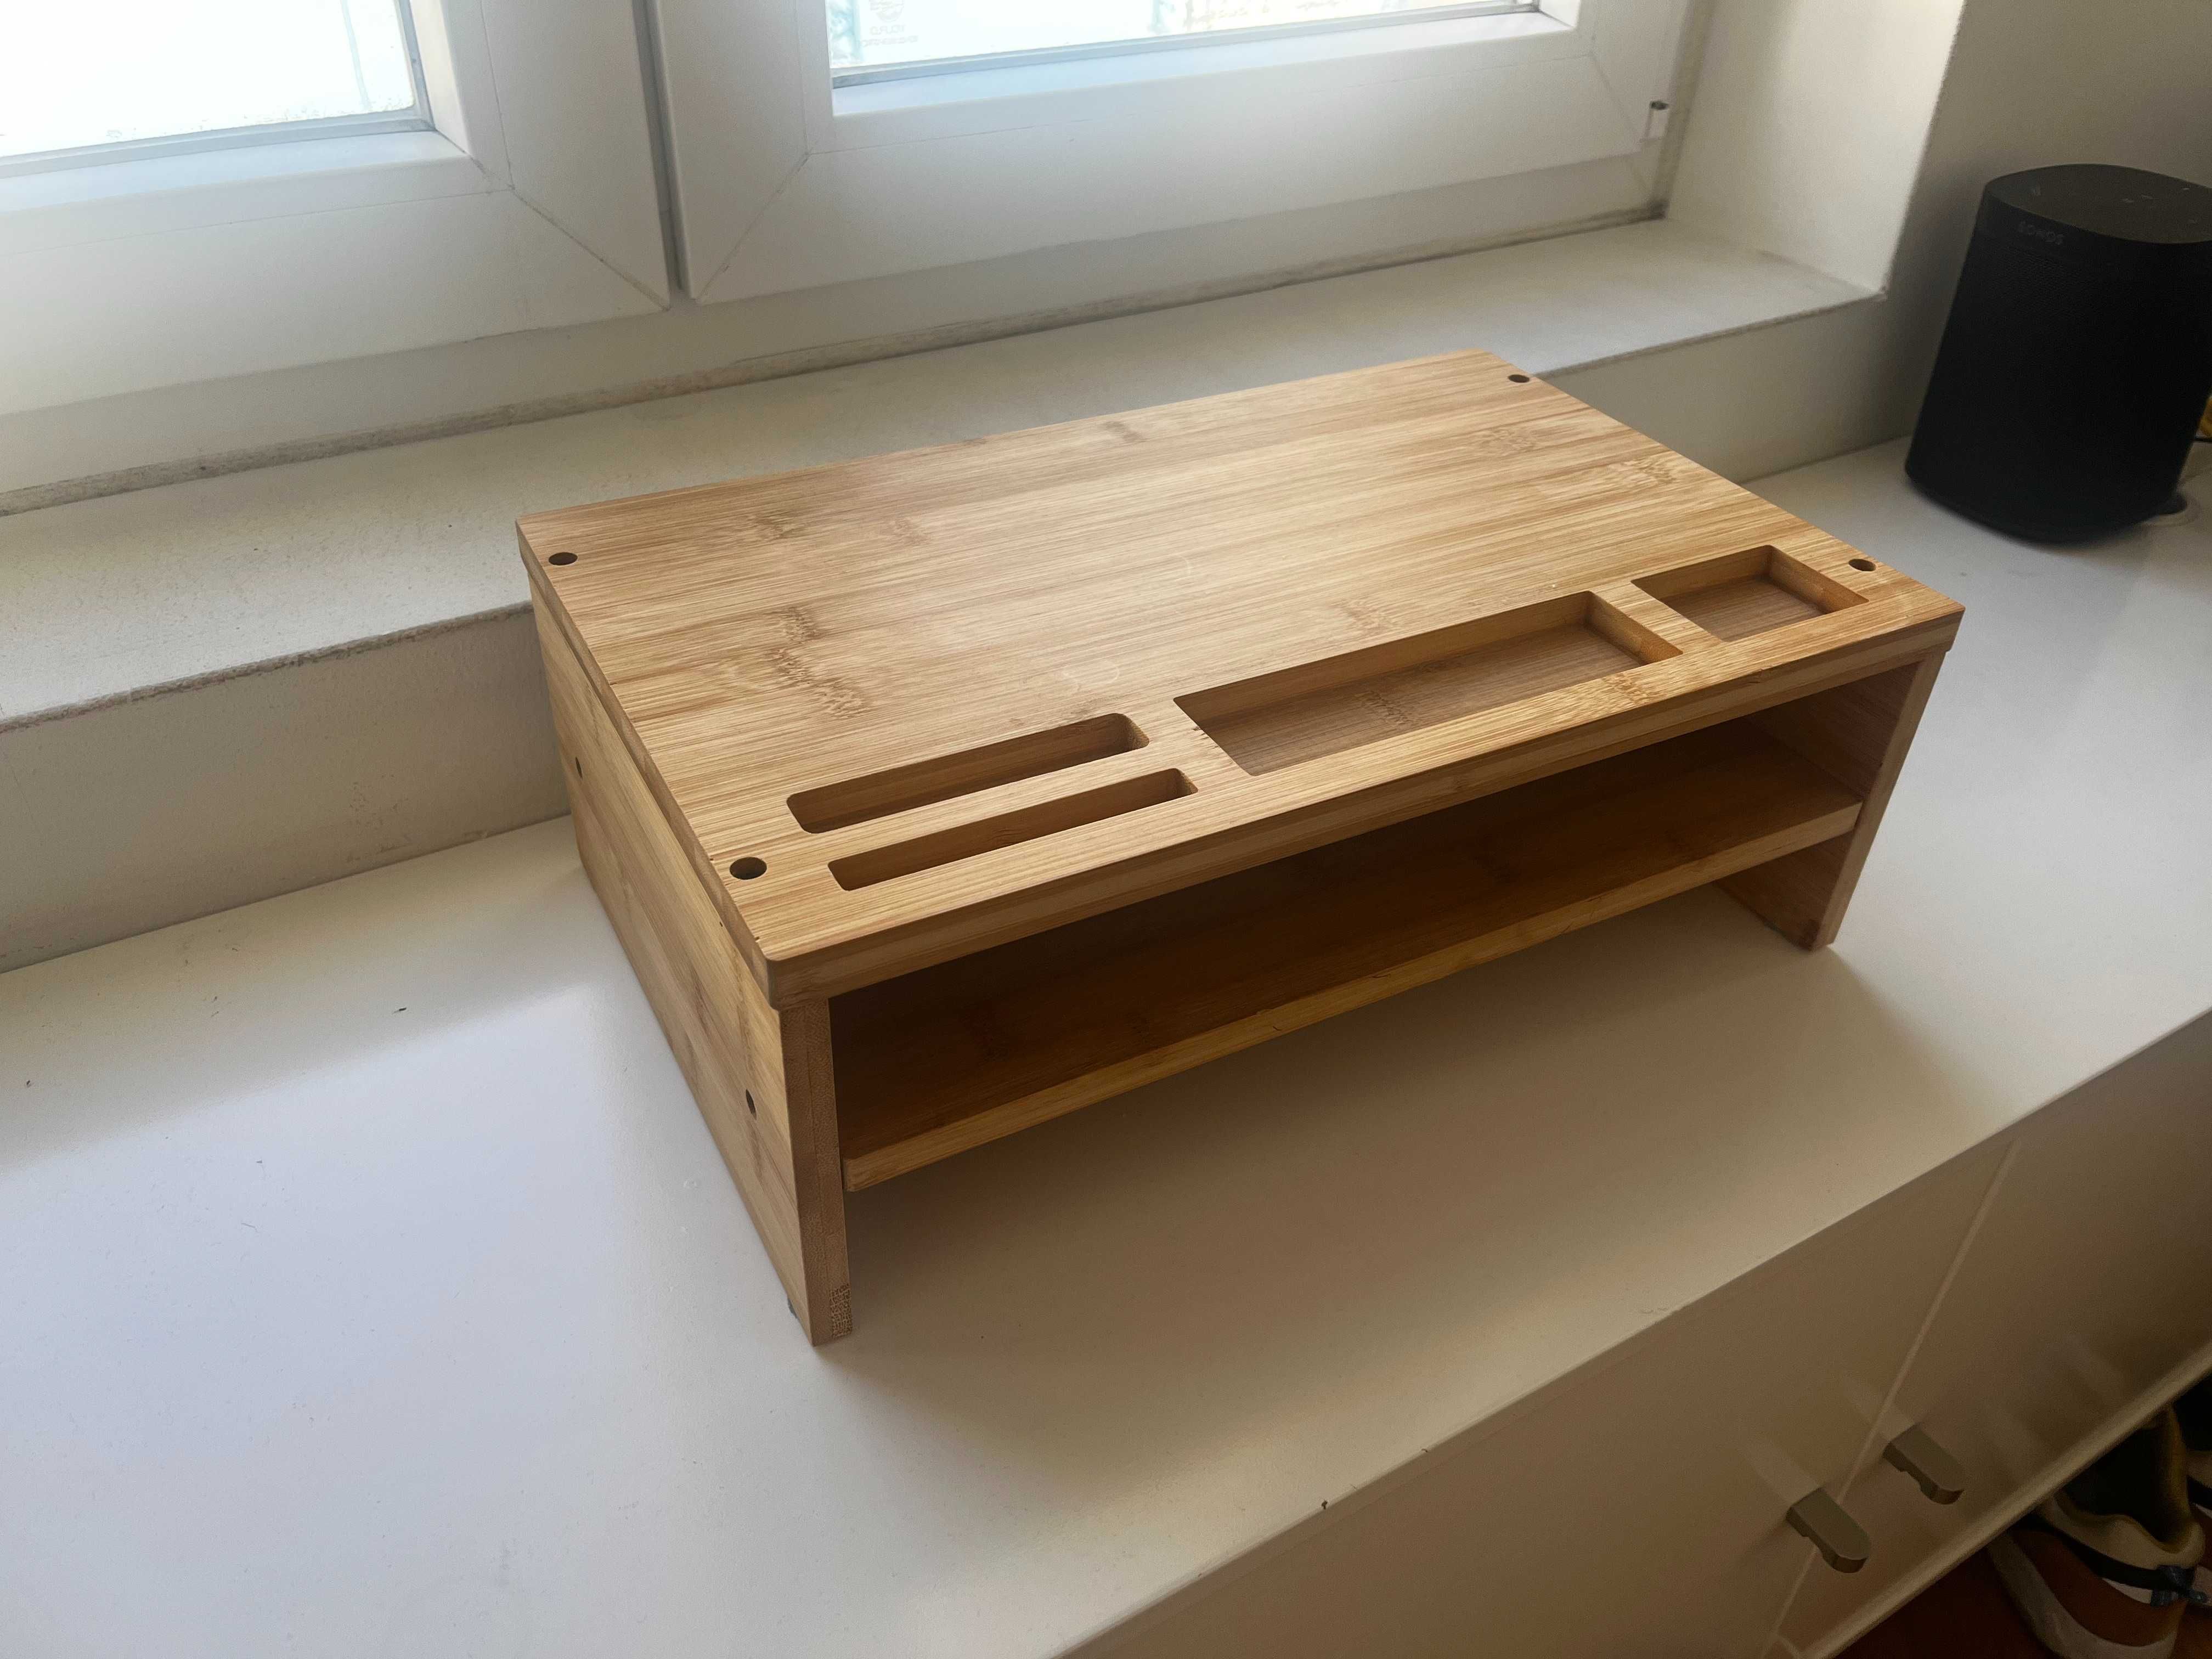 Bamboo desk organizer - support for your desktop monitor